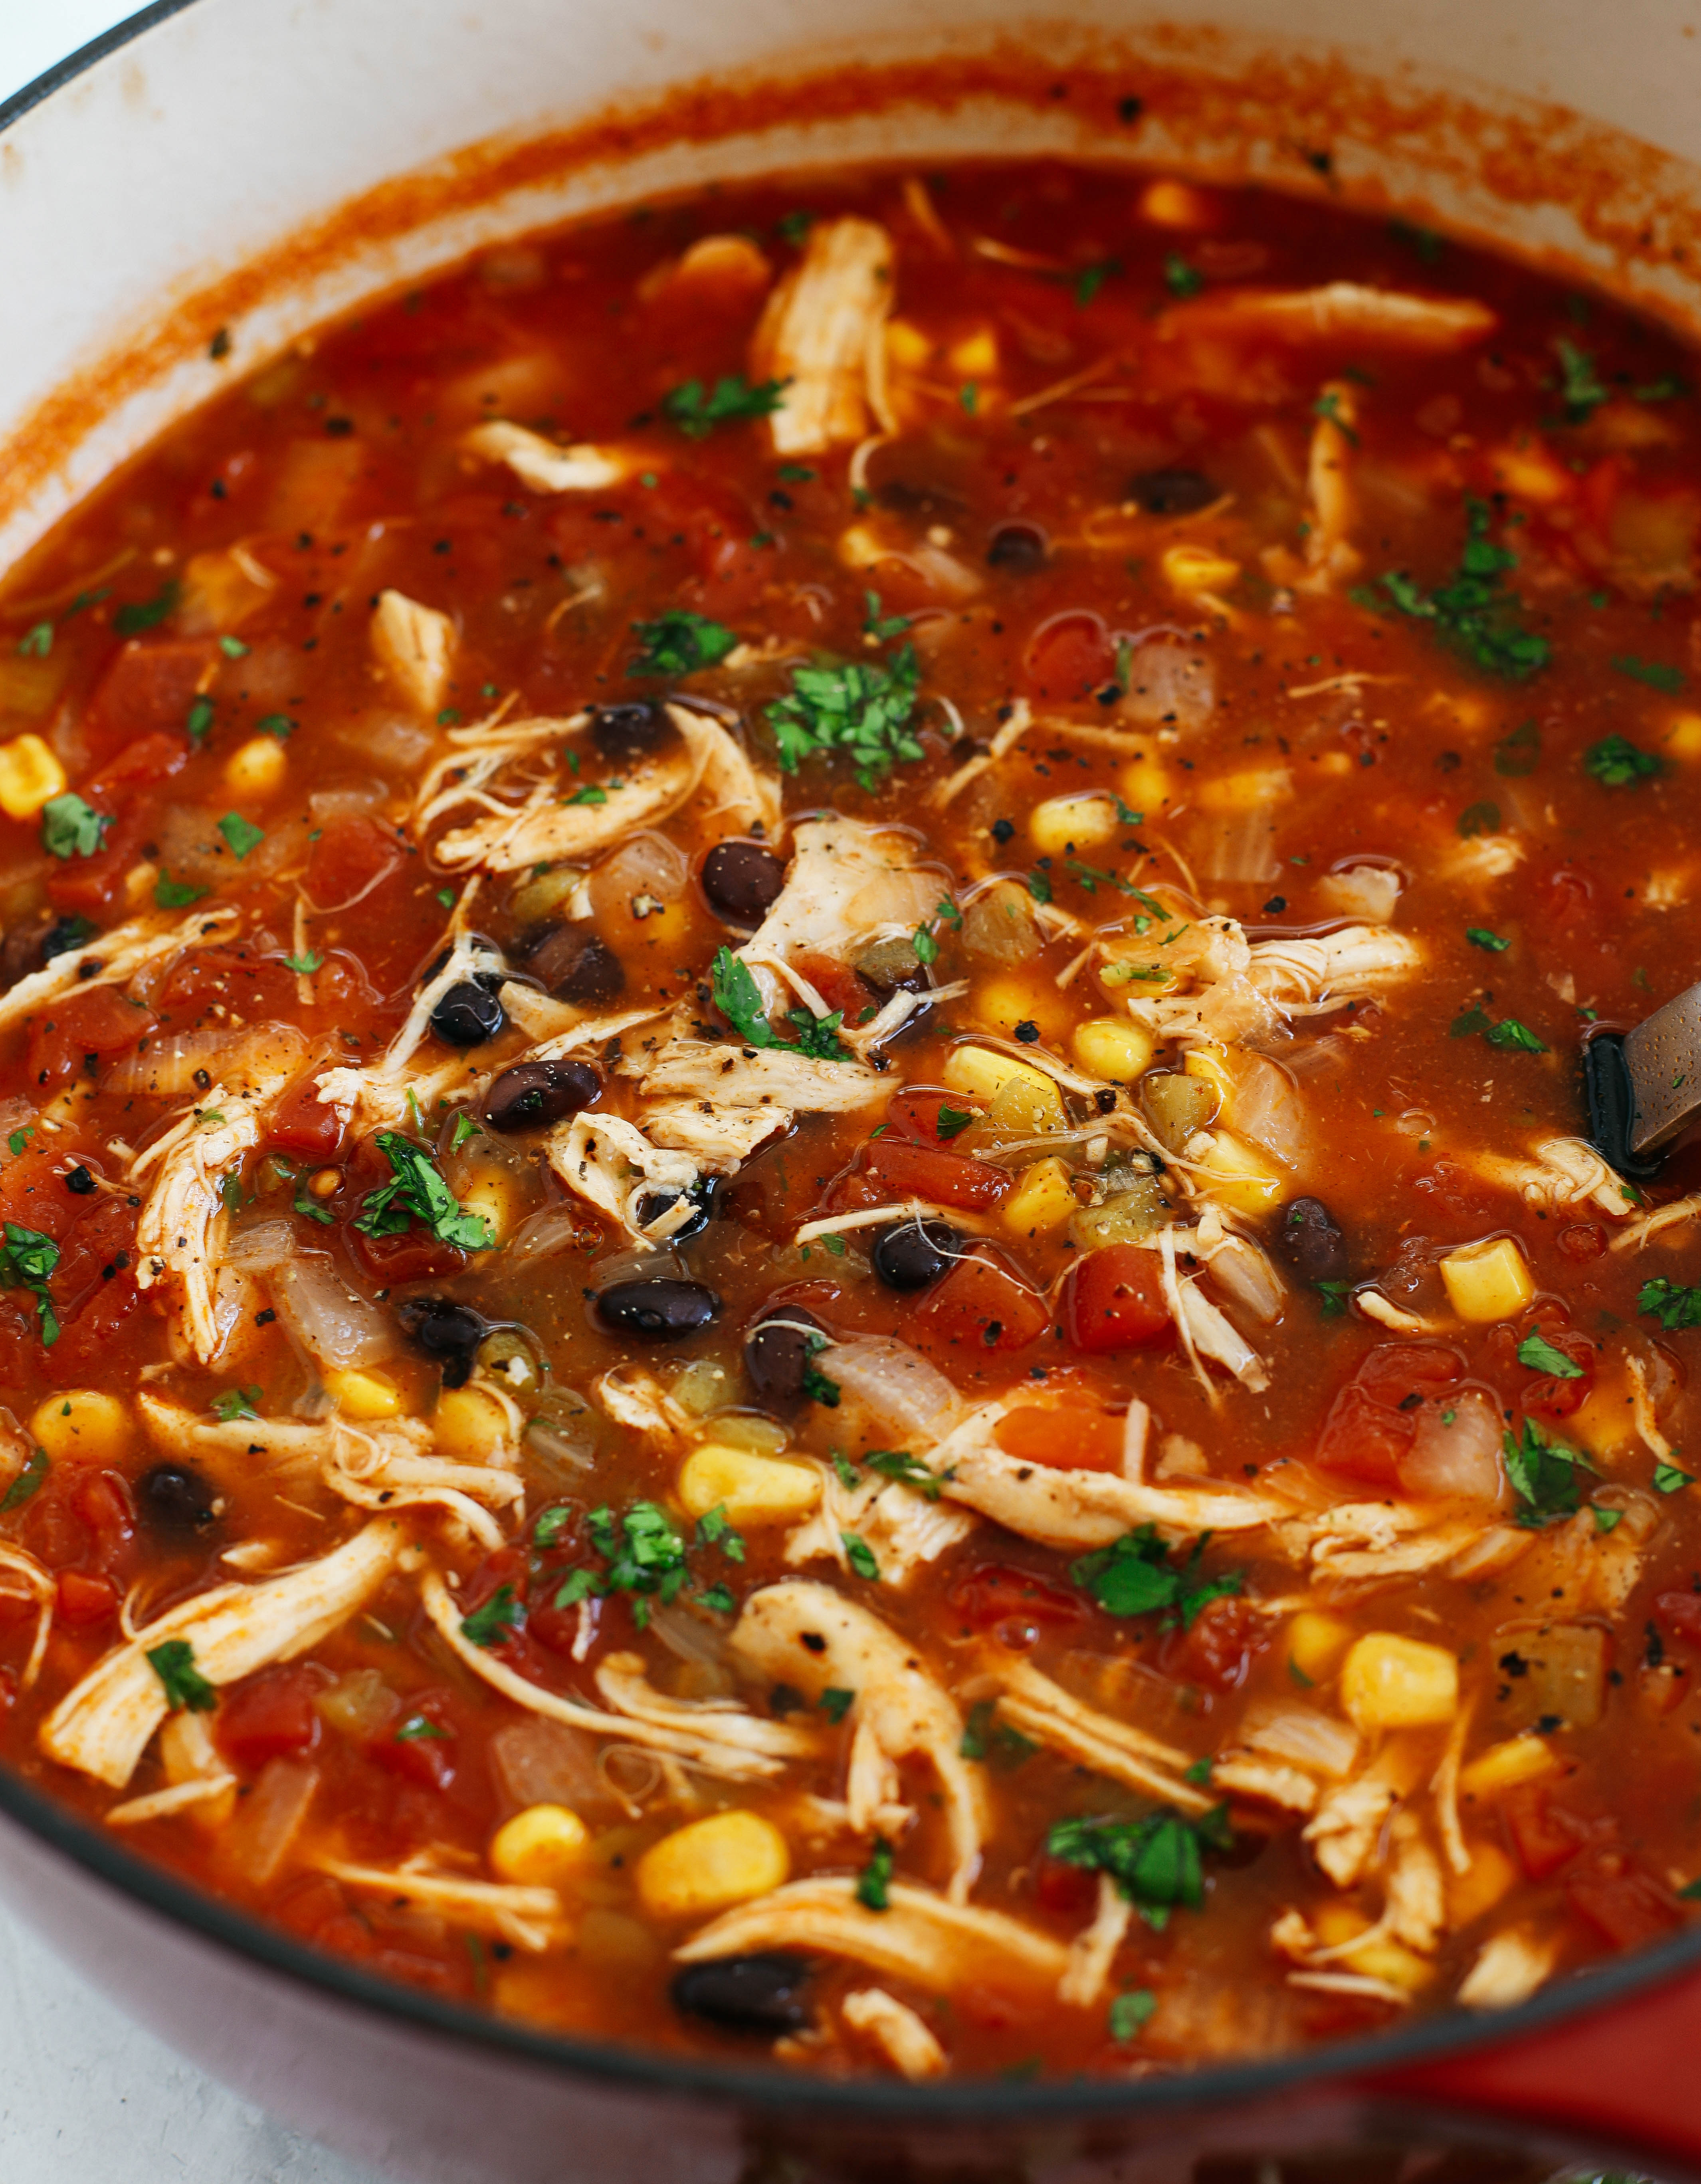 Healthy Chicken Tortilla Soup for the perfect weeknight meal that can easily be made in your instant pot, slow cooker or even right on the stove!